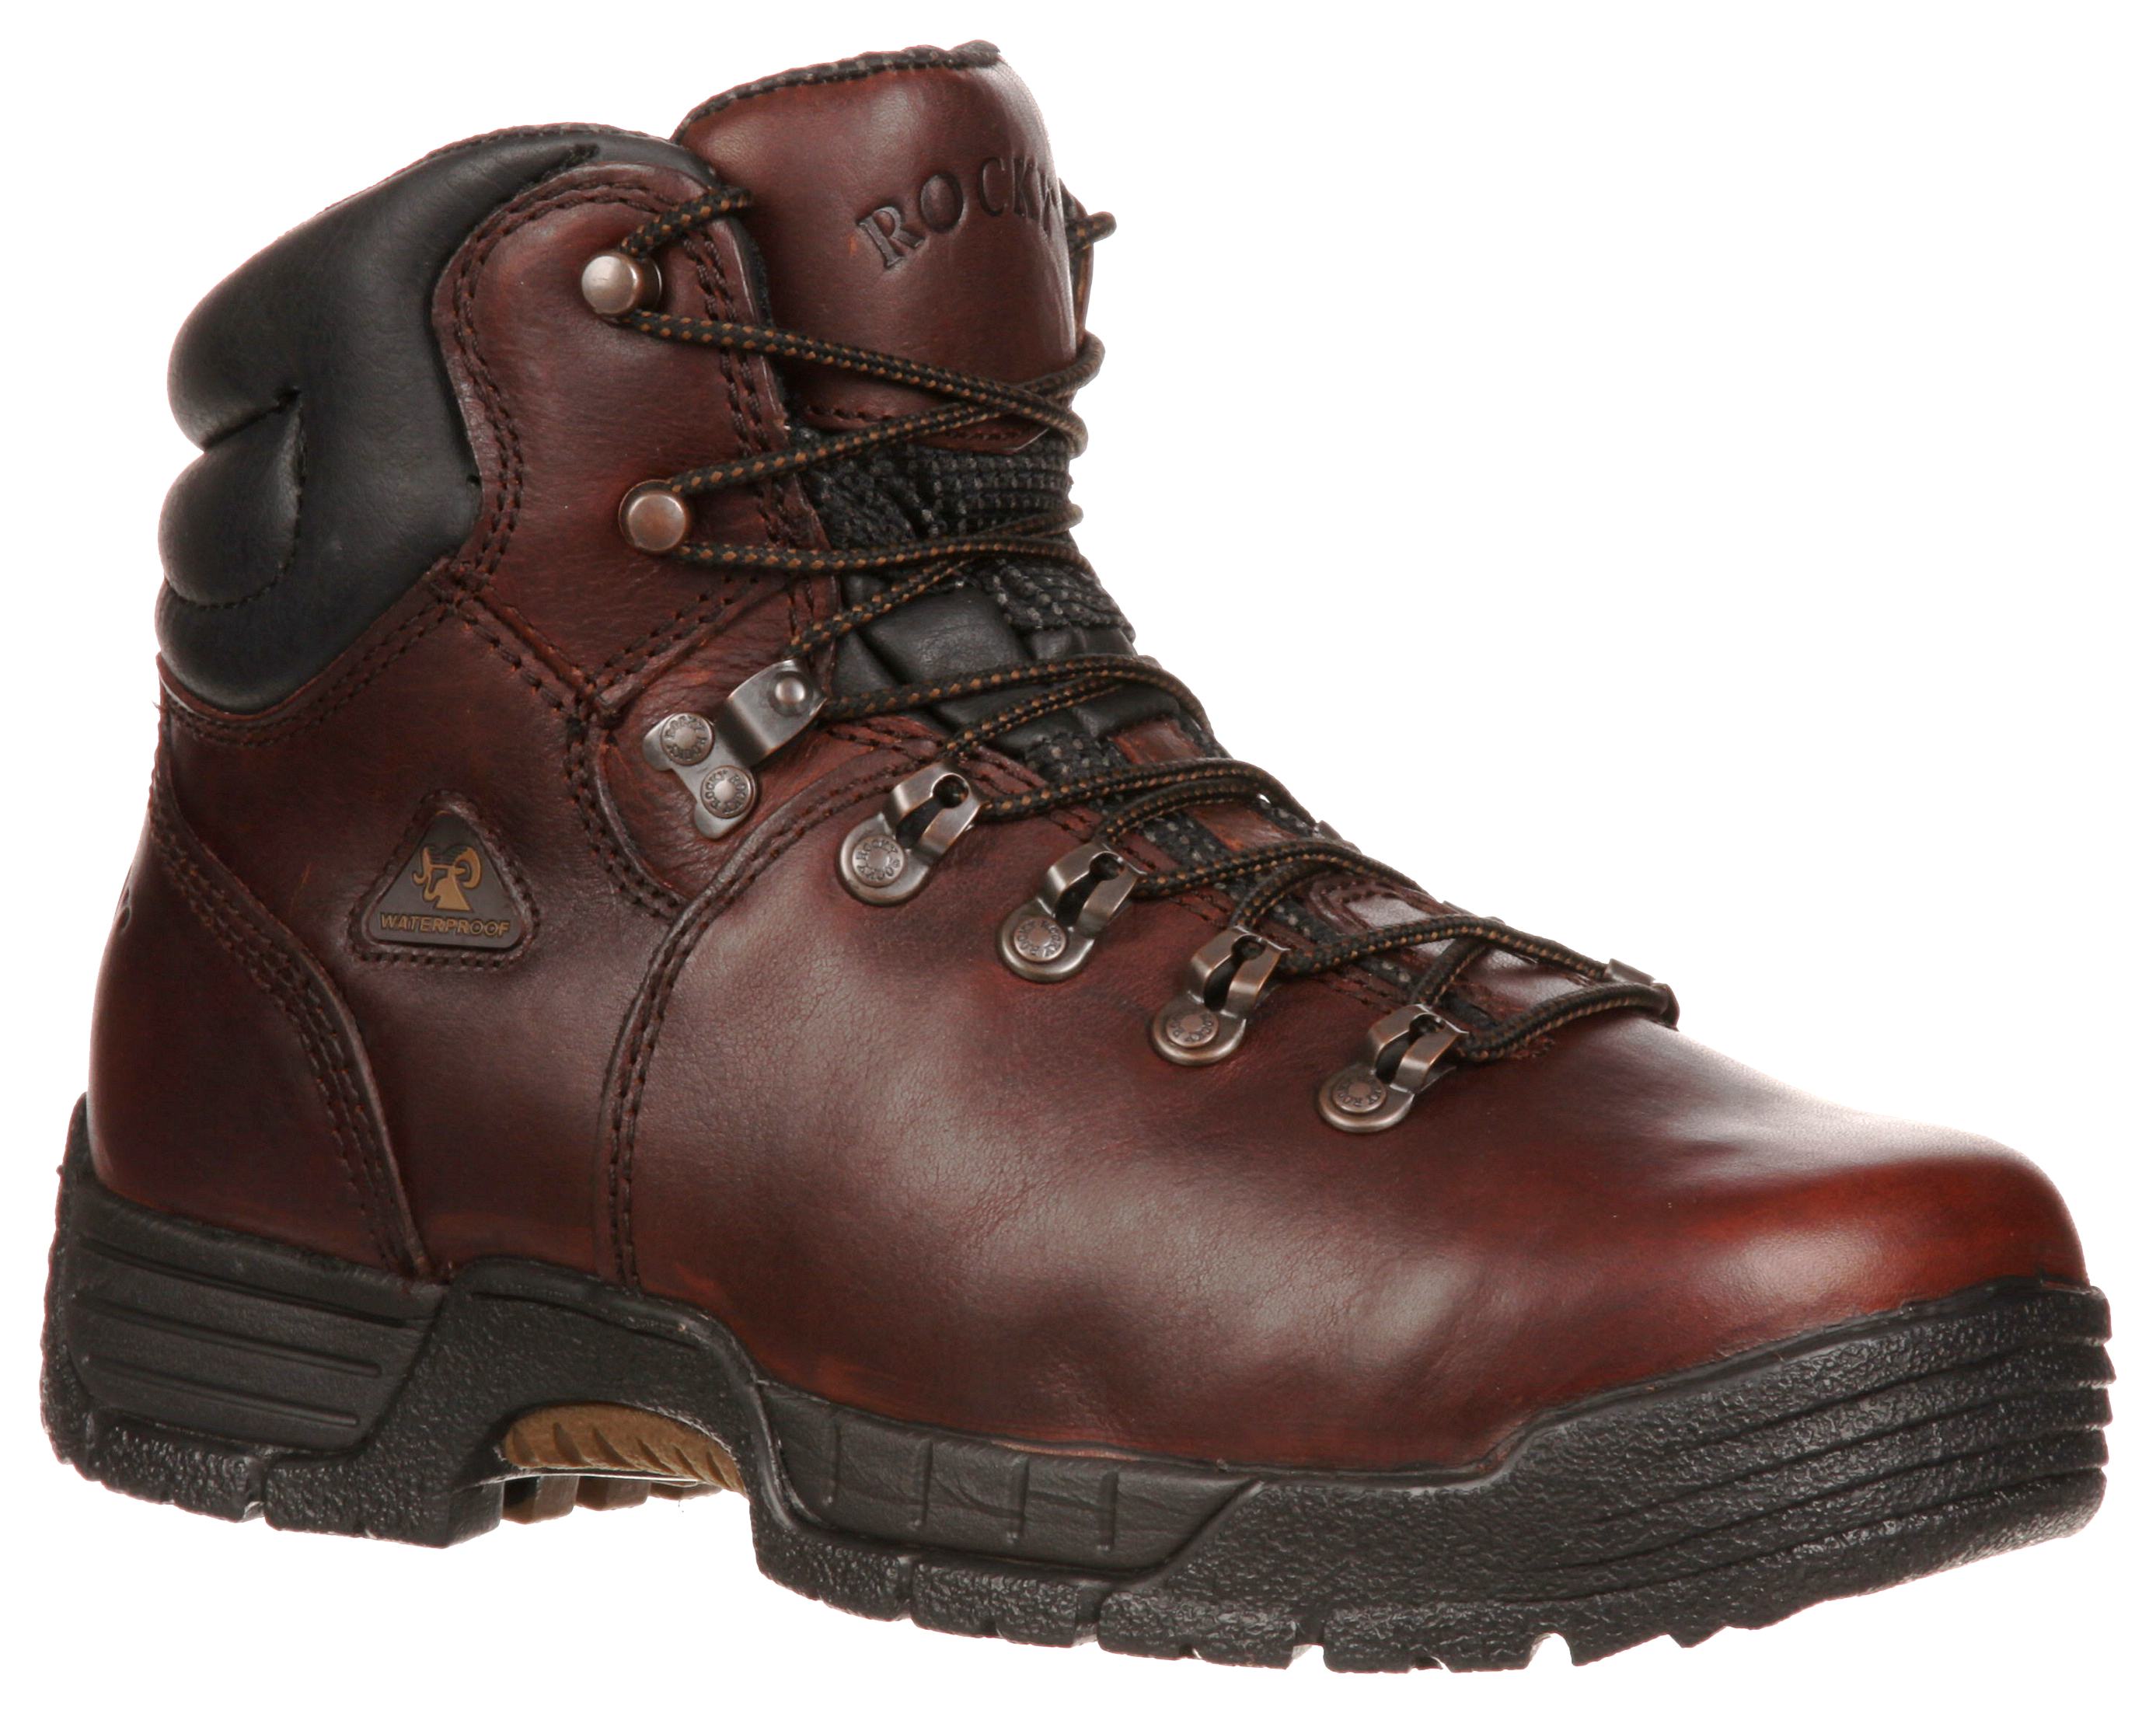 ROCKY MobiLite Waterproof Work Boots for Men - Brown - 12 M